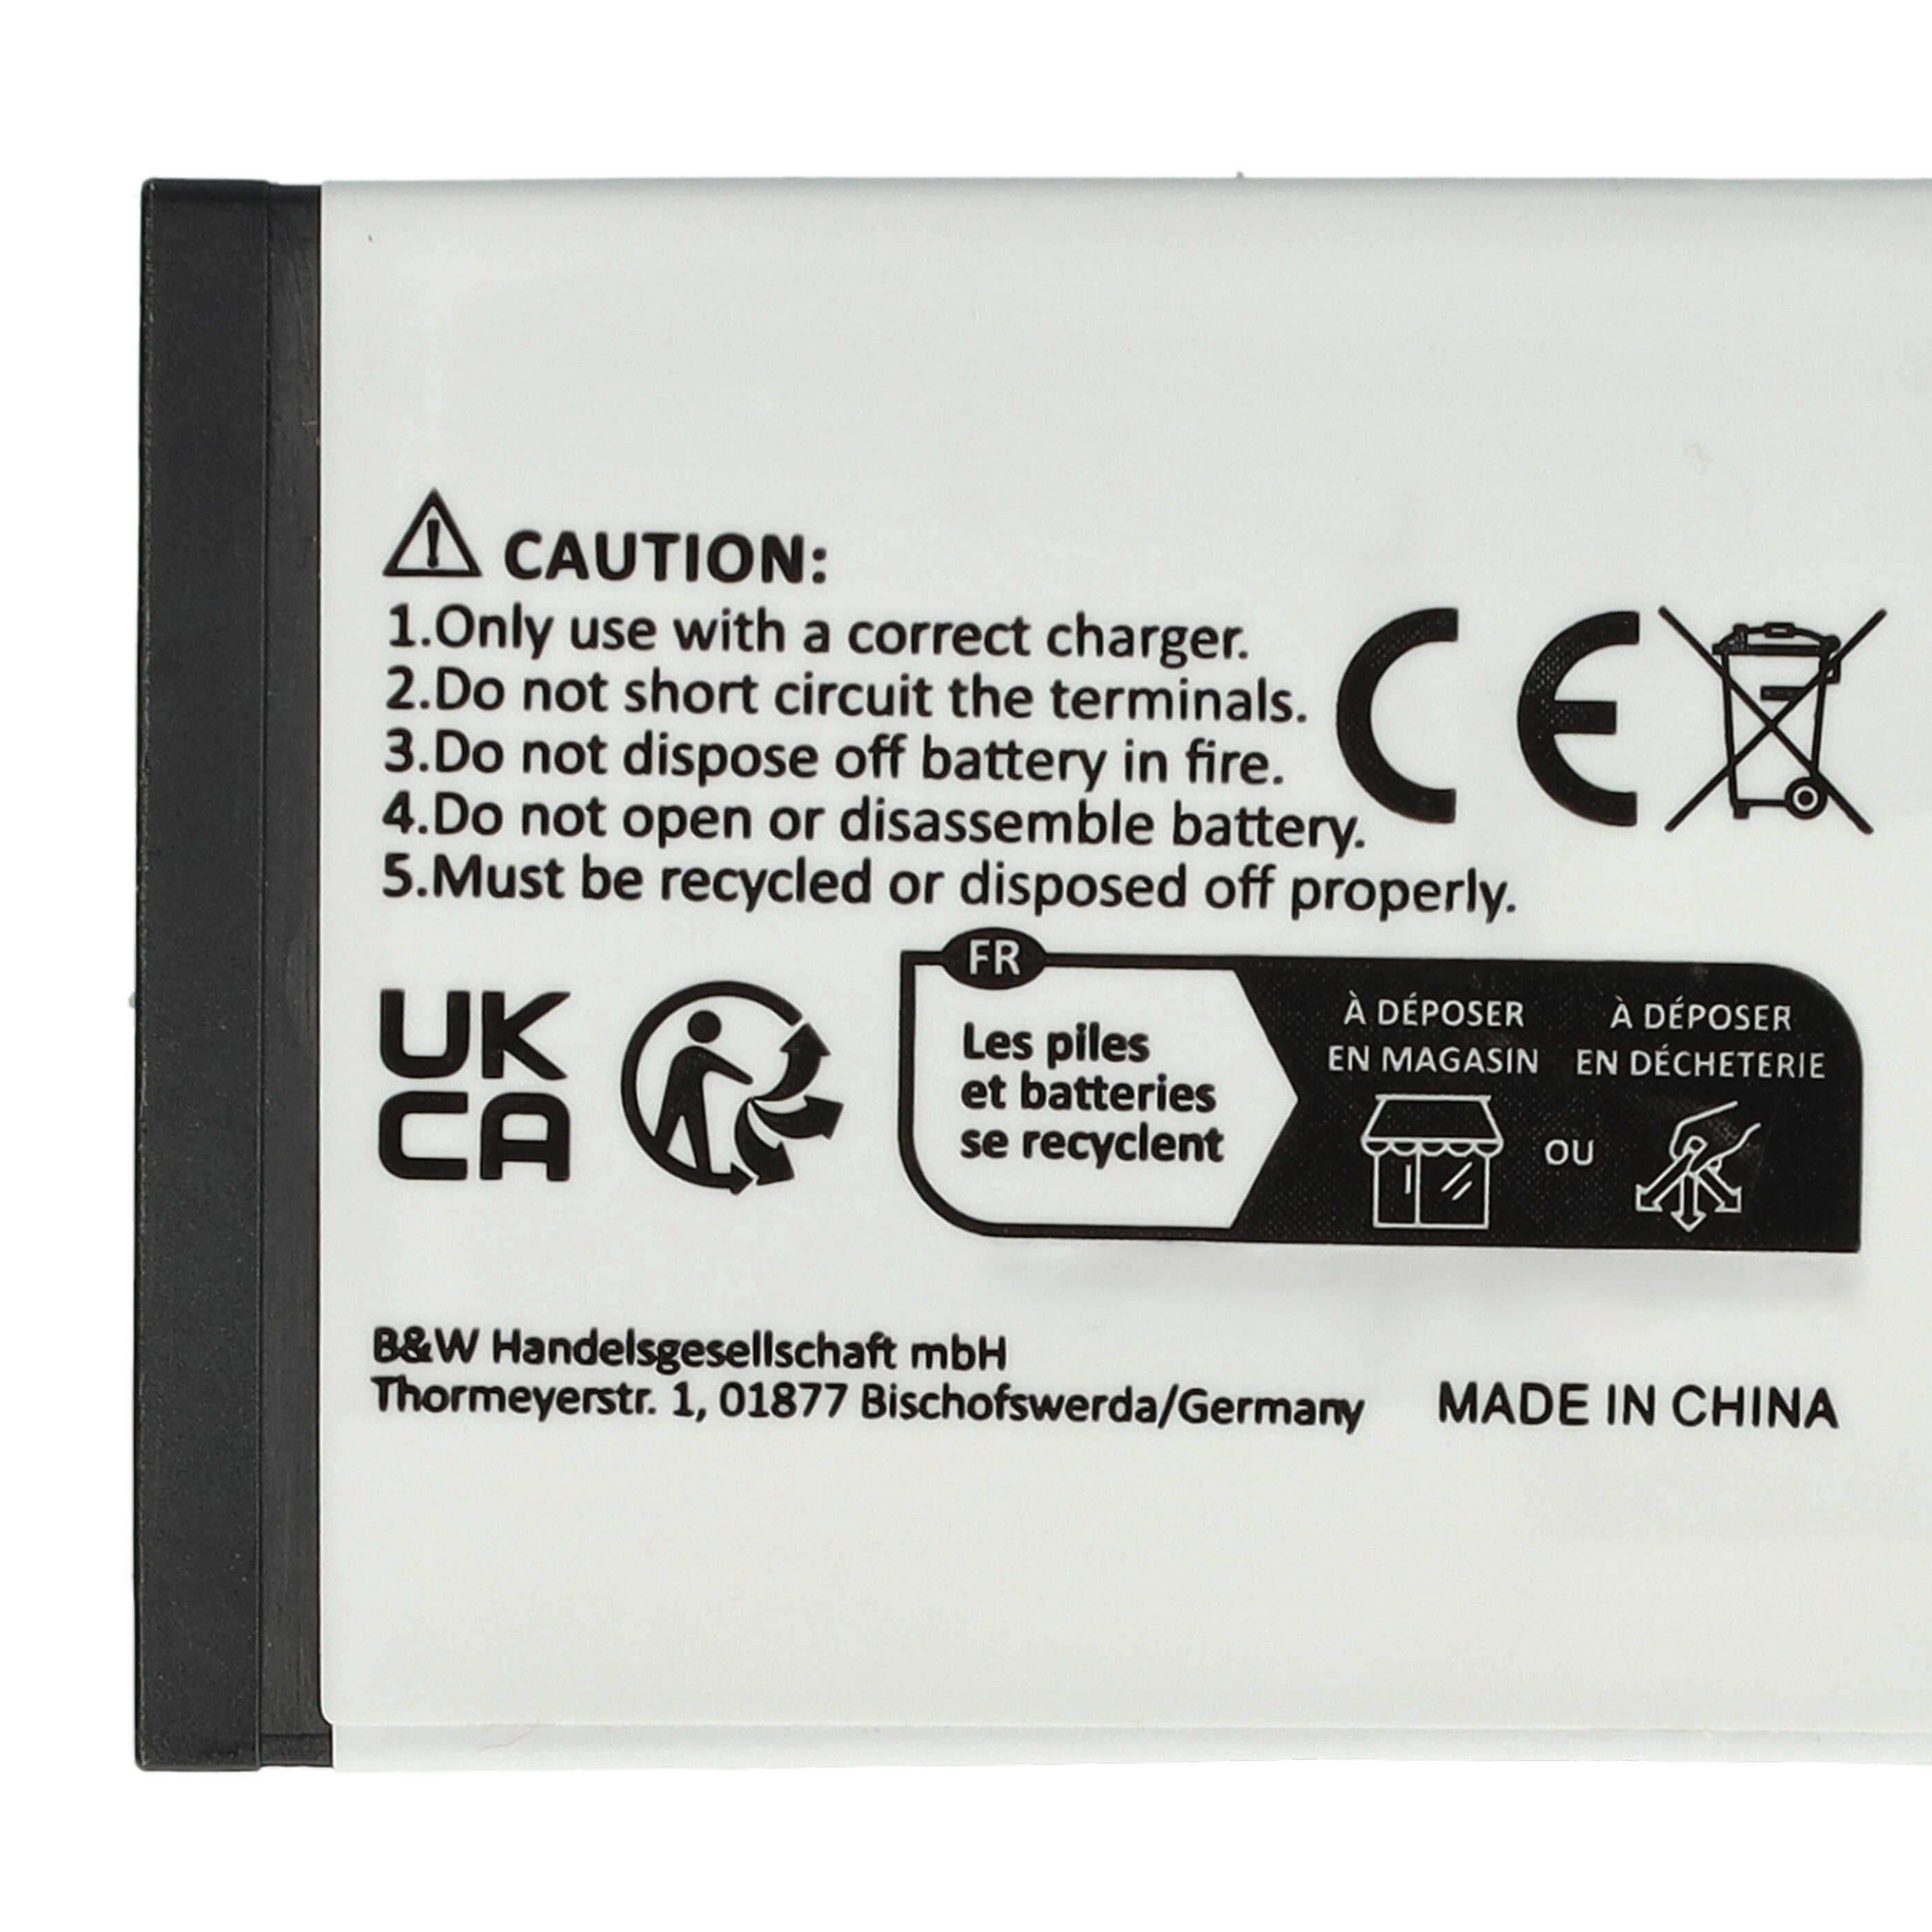 Battery (2 Units) Replacement for Panasonic DMW-BLH7E, DMW-BLH7 - 600mAh, 7.2V, Li-Ion with Info Chip